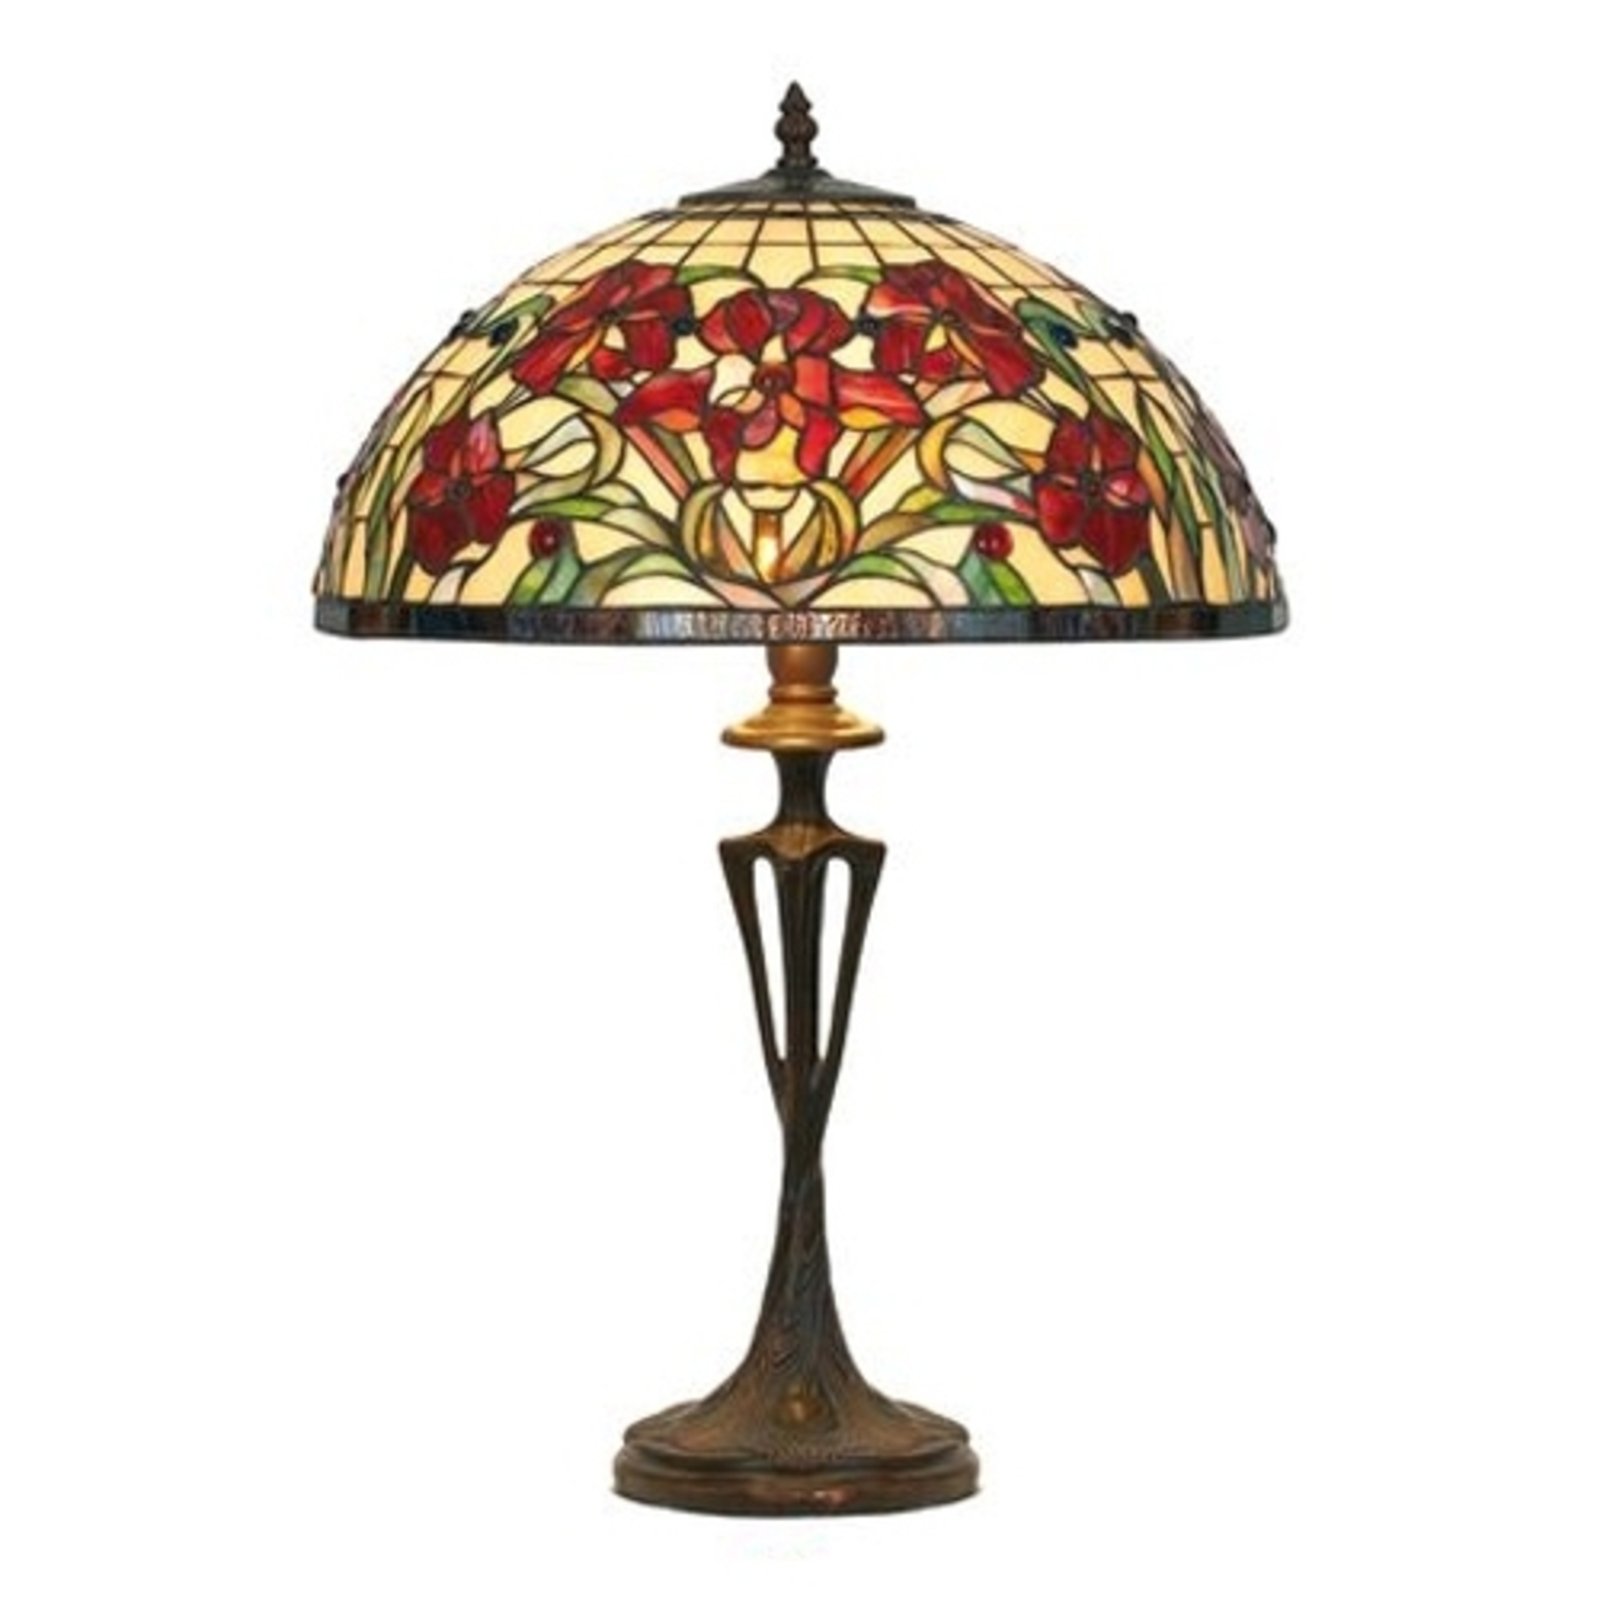 Eline table lamp in Tiffany style